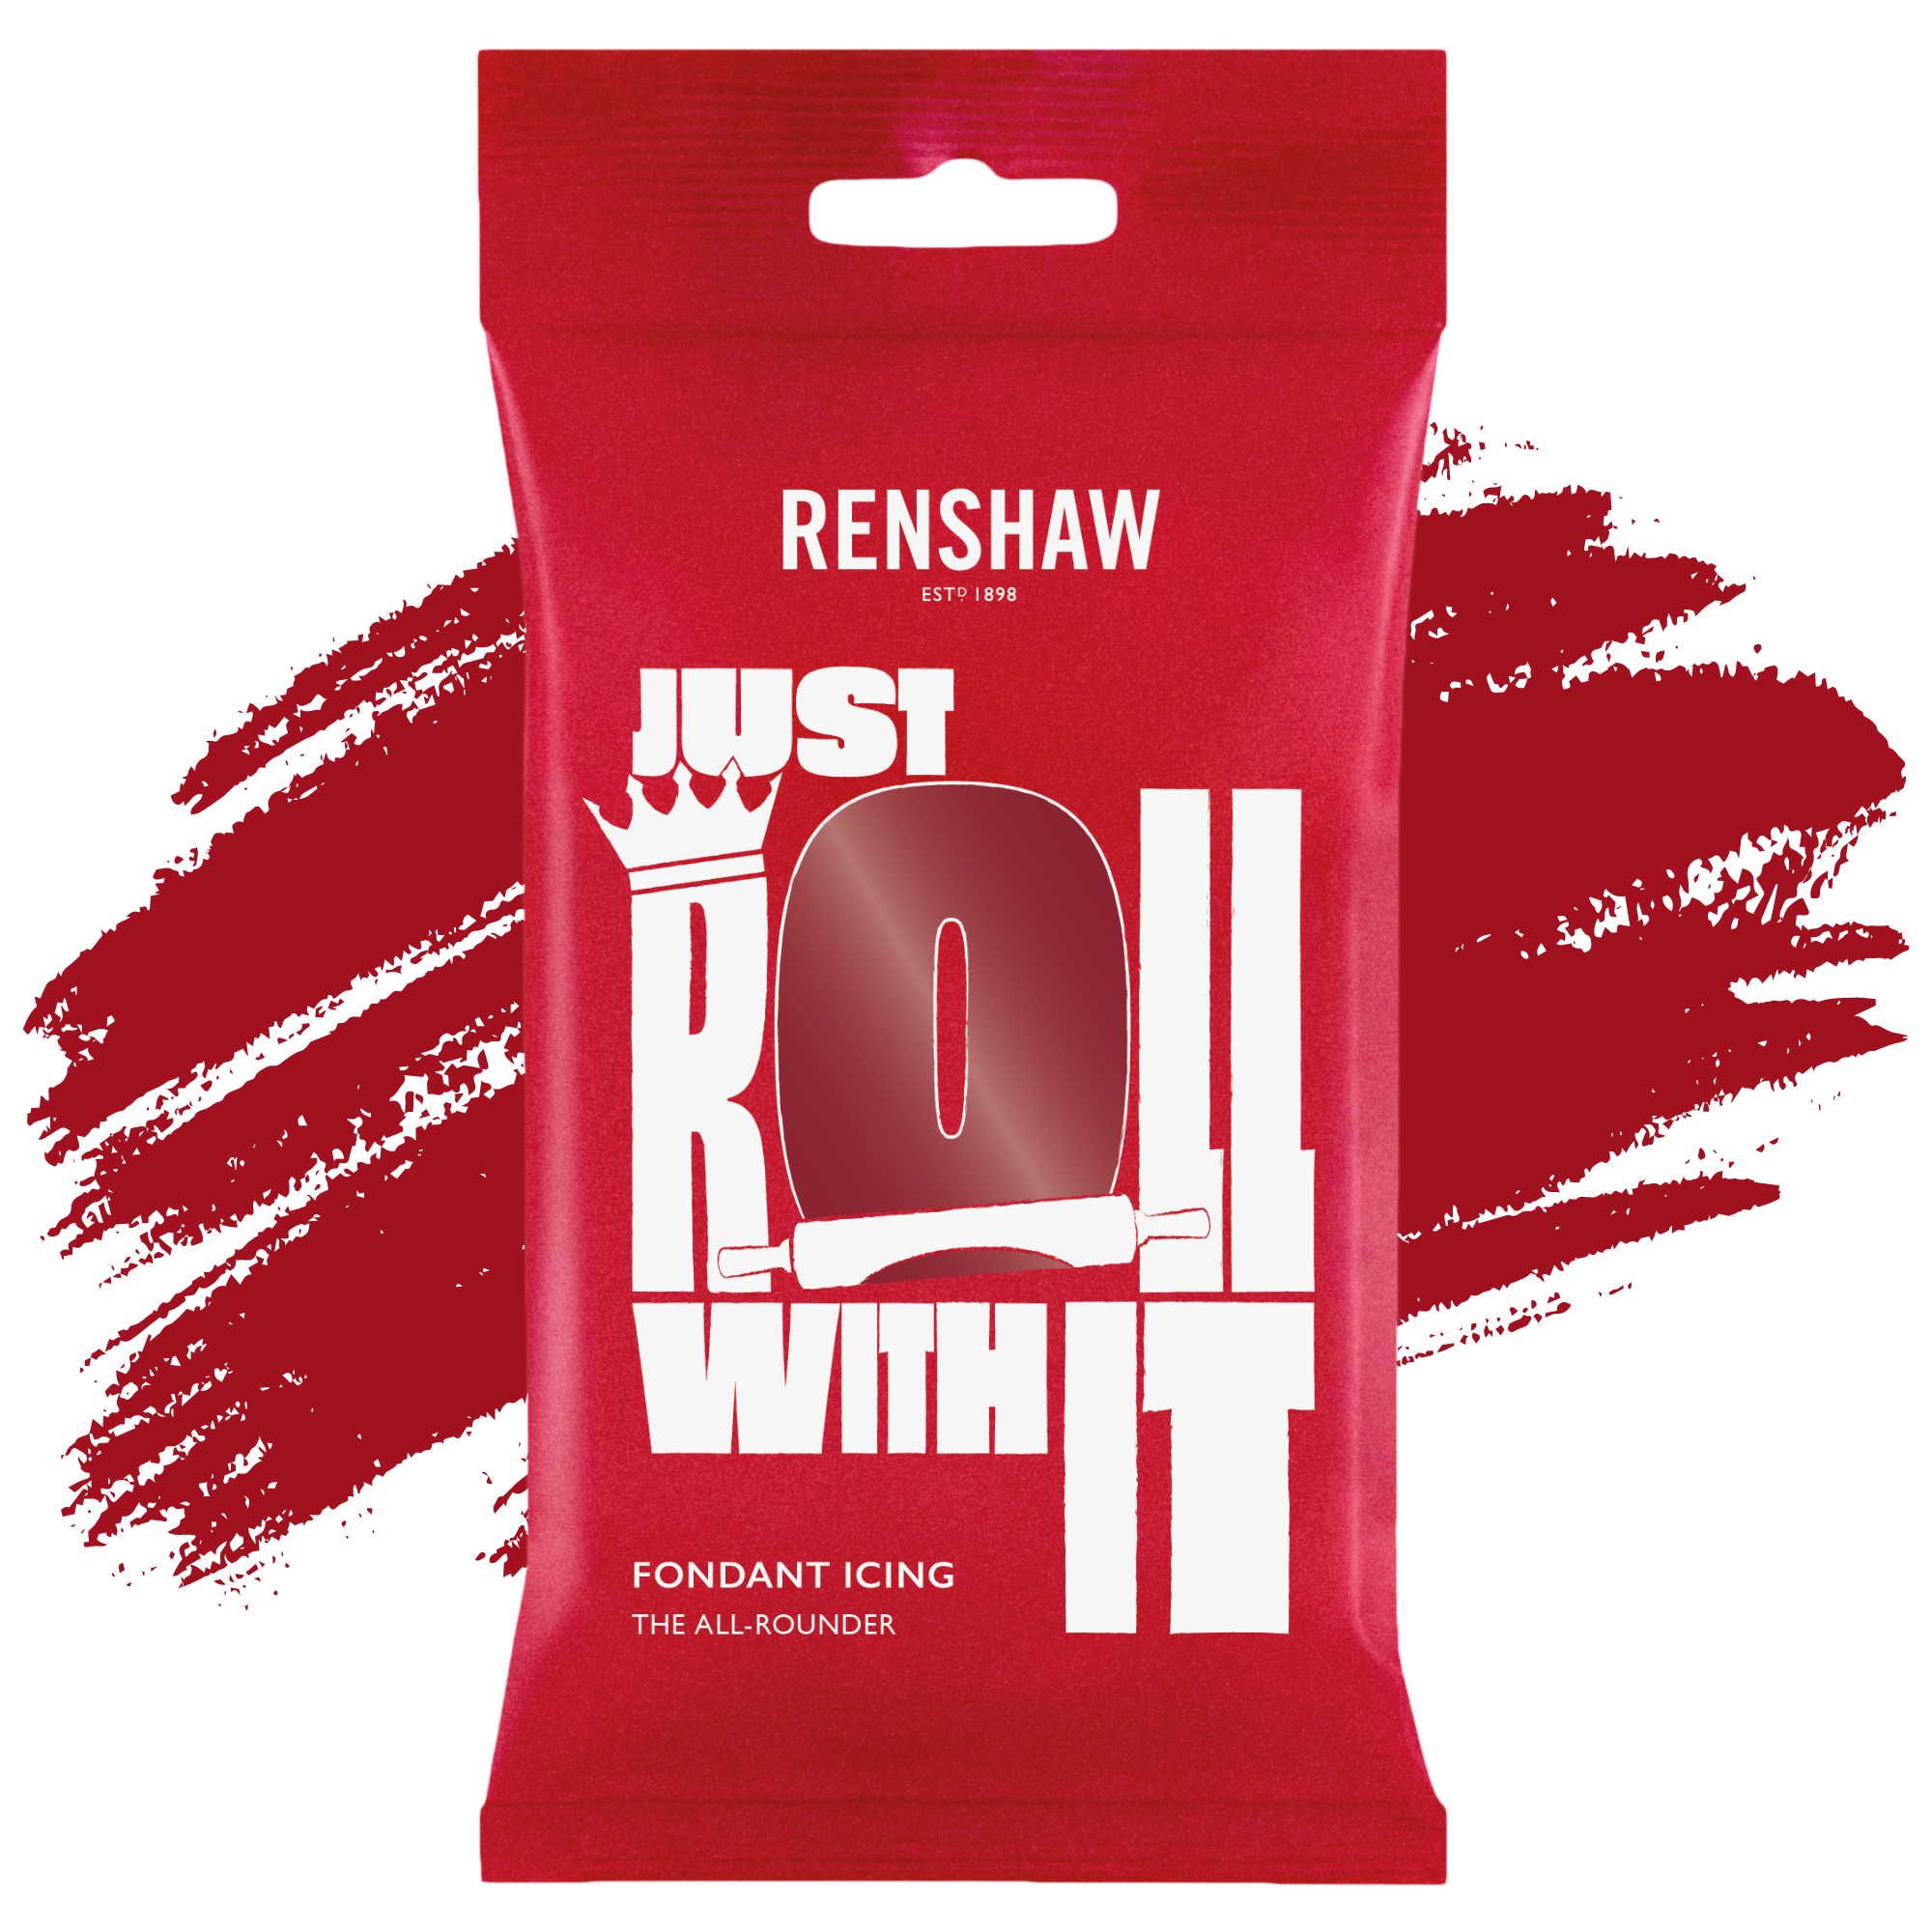 Renshaw Professional Sugar Paste Ready to Roll Fondant Just Roll with it Icing - Ruby Red - 250g